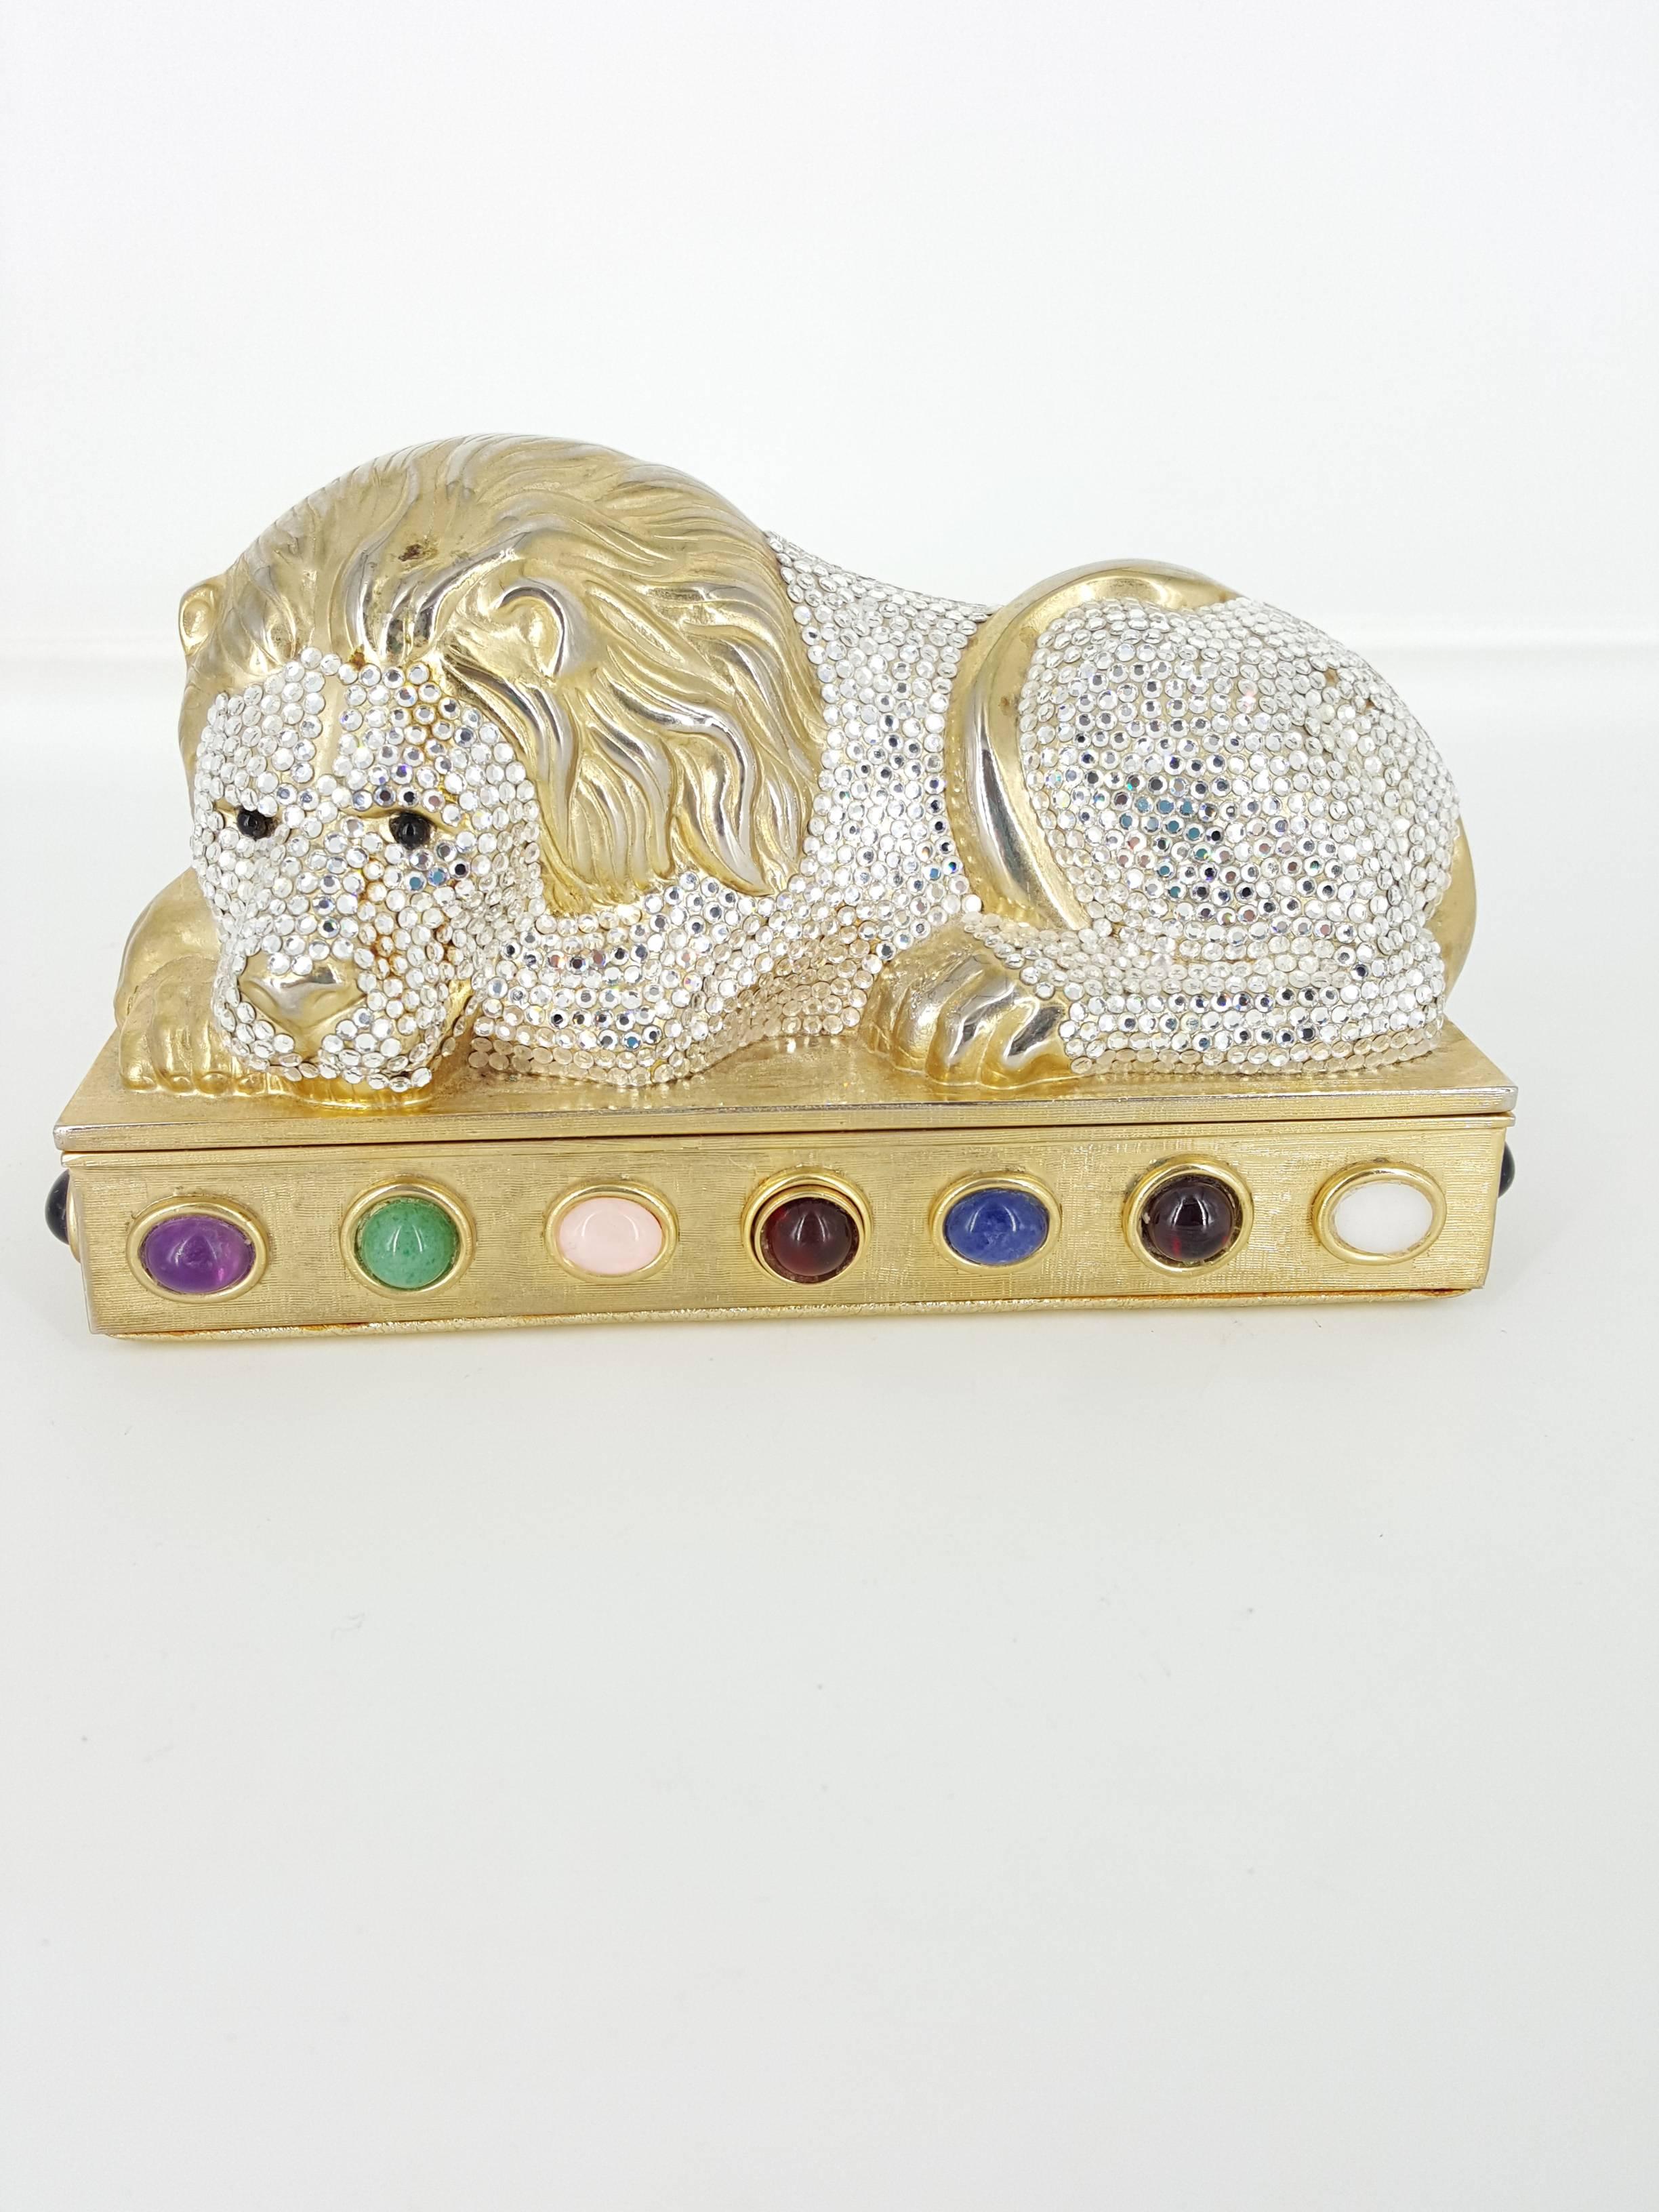 Offered for sale is this darling Lion clutch by Judith Leiber encrusted with Swavorski crystal and semi precious stones. This clutch is from 1987 and in excellent condition.  The lion has black onyx eyes and there are 20 cabochon semi precious